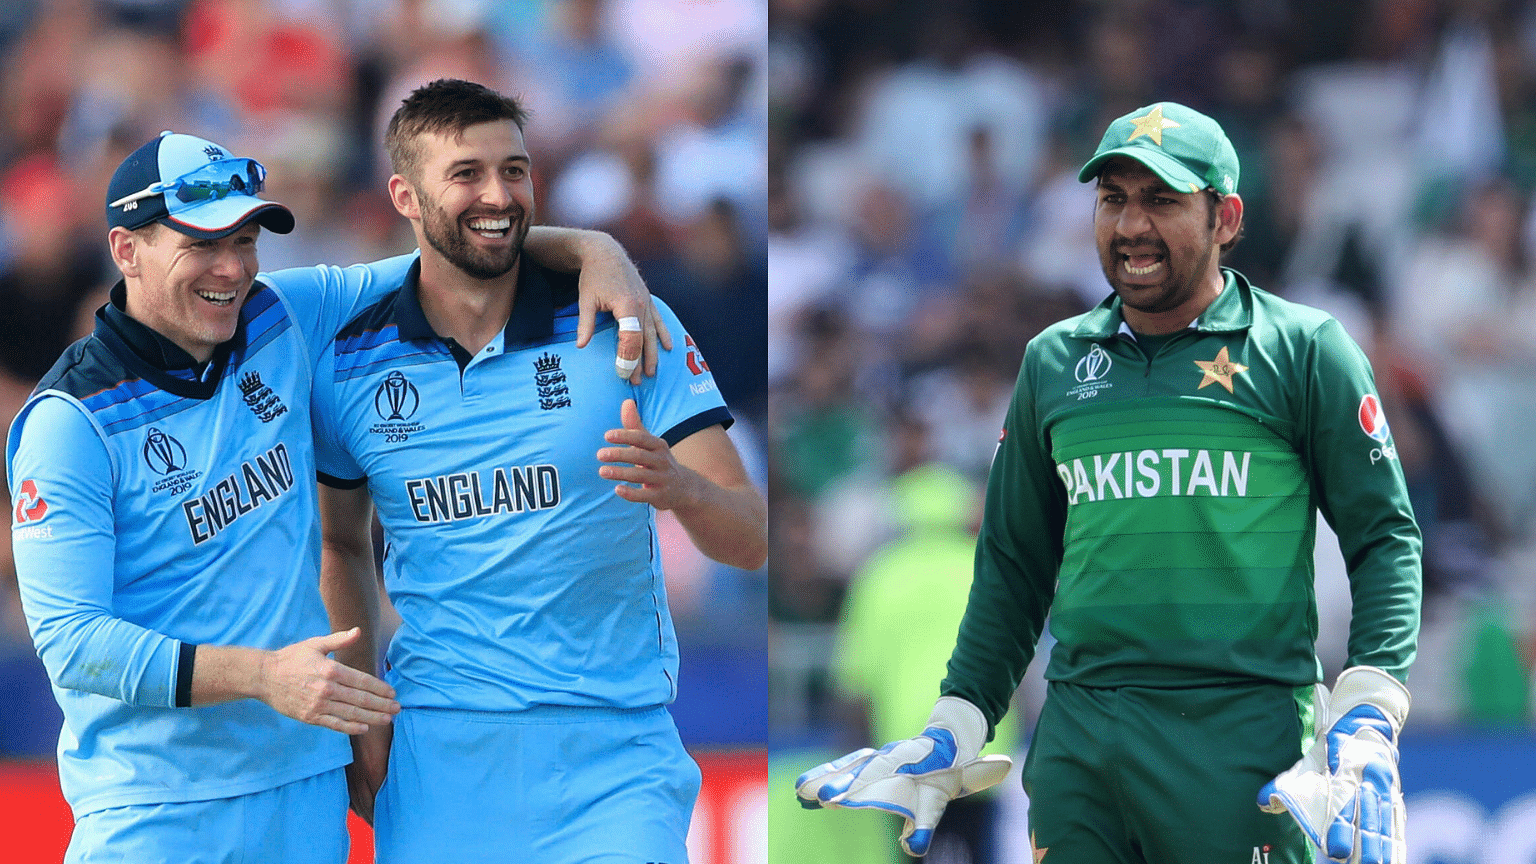 England’s 119-run win over New Zealand, making it nearly impossible for Pakistan to make the playoffs.